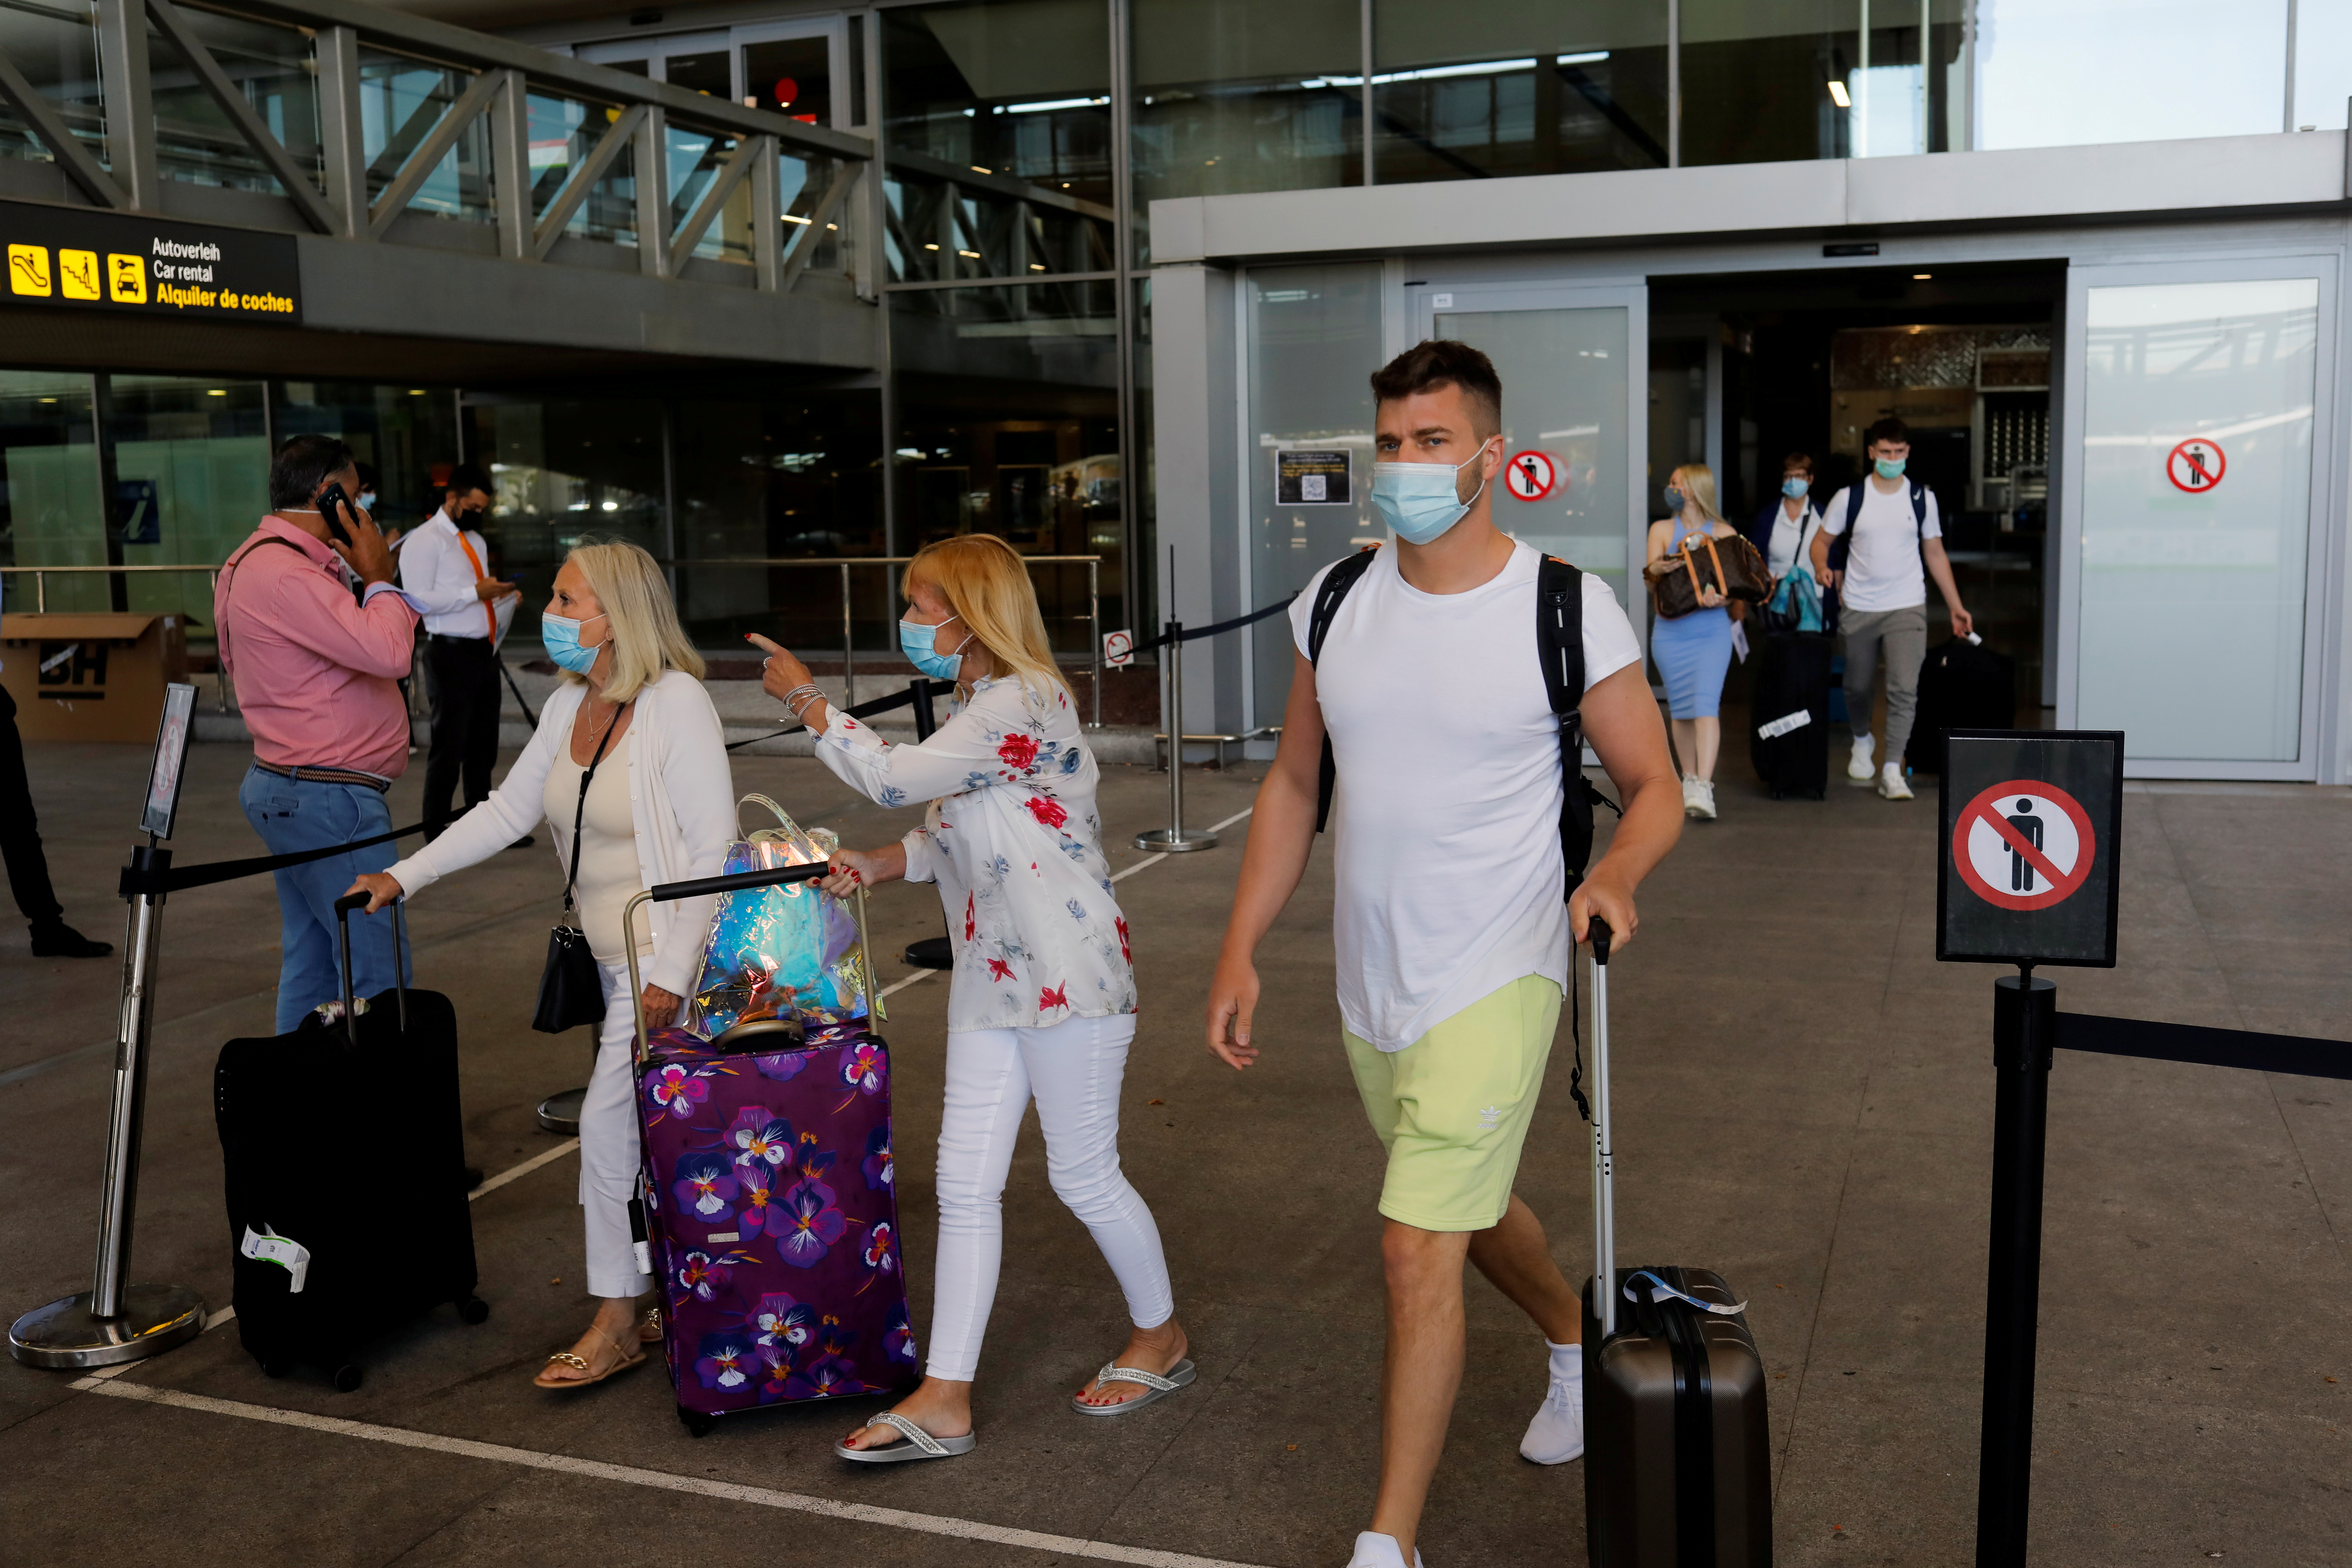 Tourists wearing protective face masks walk with their luggage as they arrive at Malaga-Costa del Sol Airport, in Malaga, Spain, June 7, 2021. REUTERS/Jon Nazca 